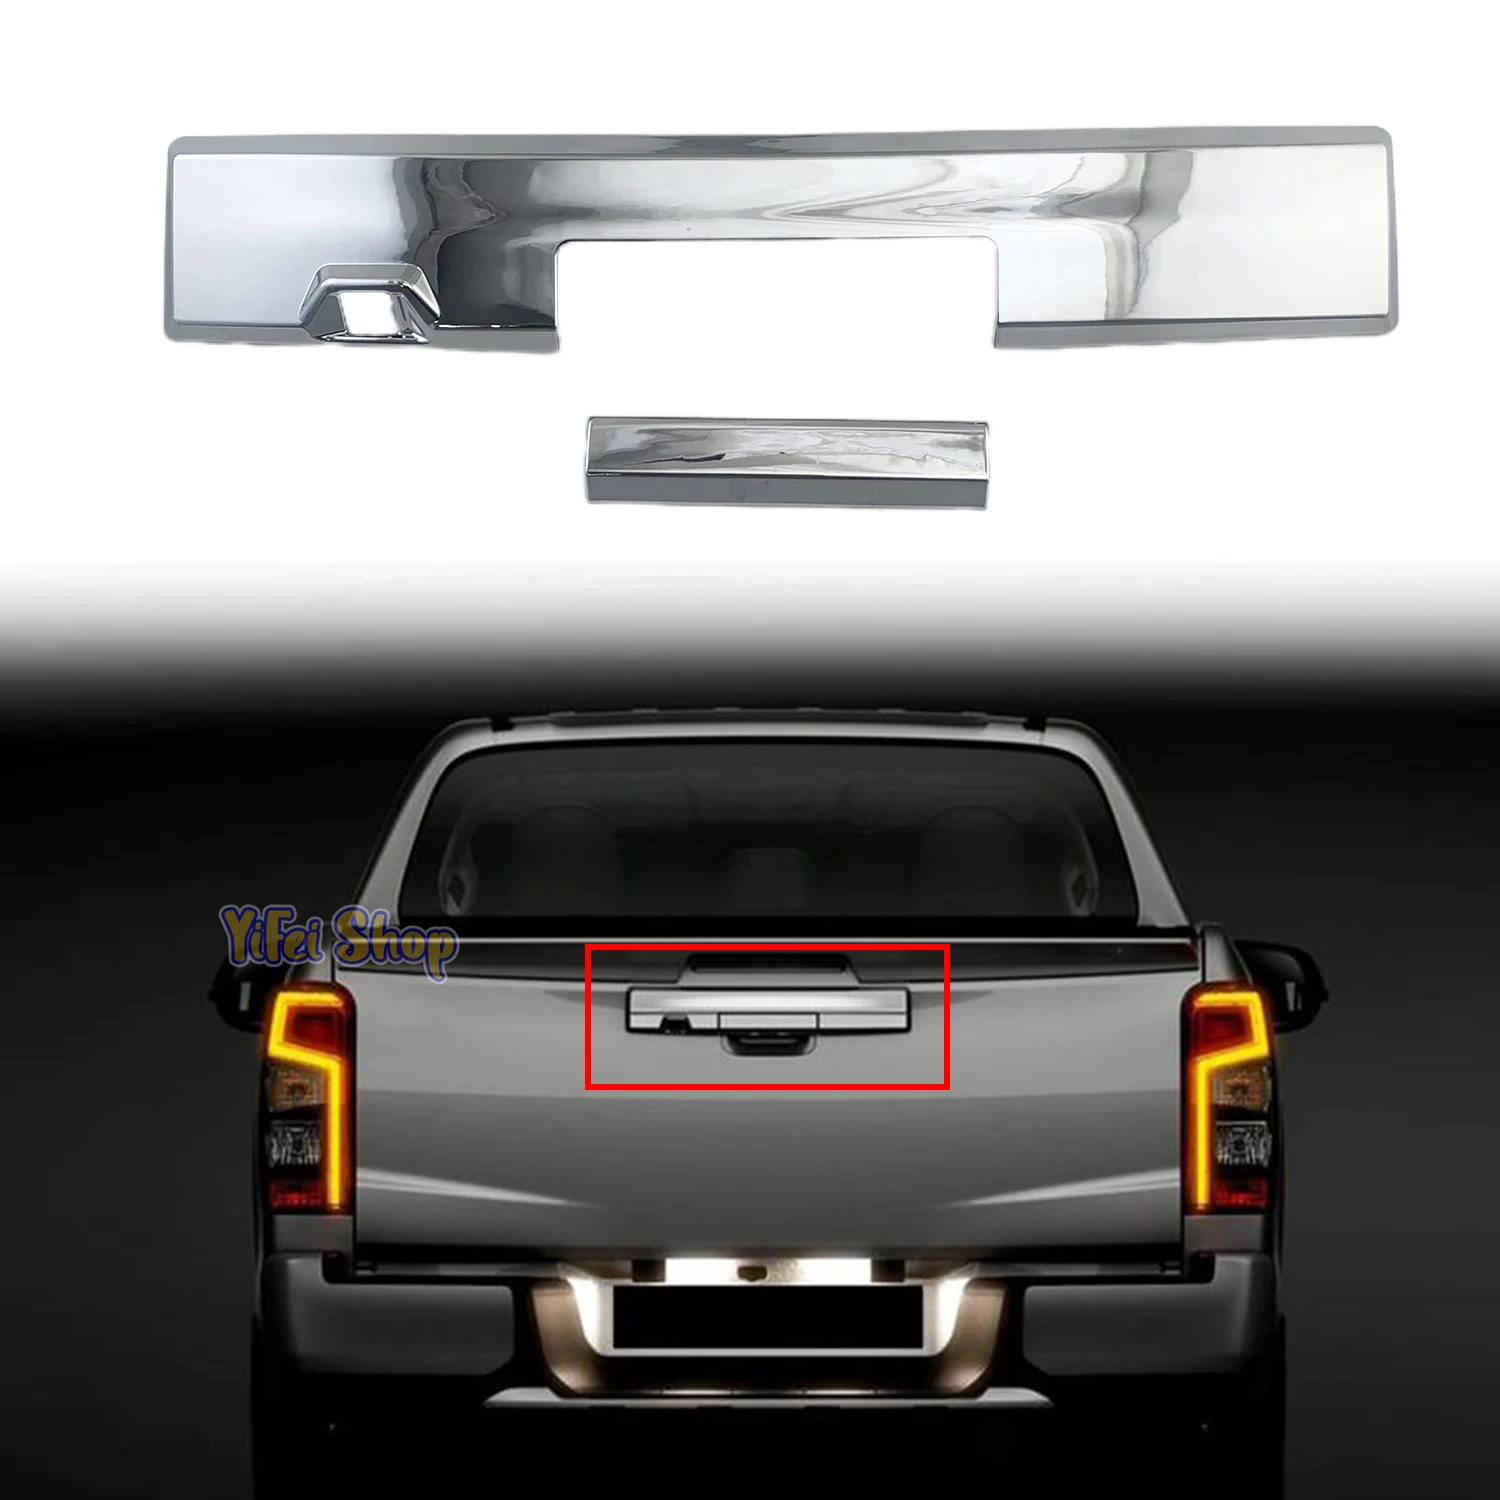 

New Paste Style Car ABS Chrom Accessories Plated Rear Trunk Lid Cover Trim For Mitsubishi Triton L200 2019 2020 2021 2022 2023